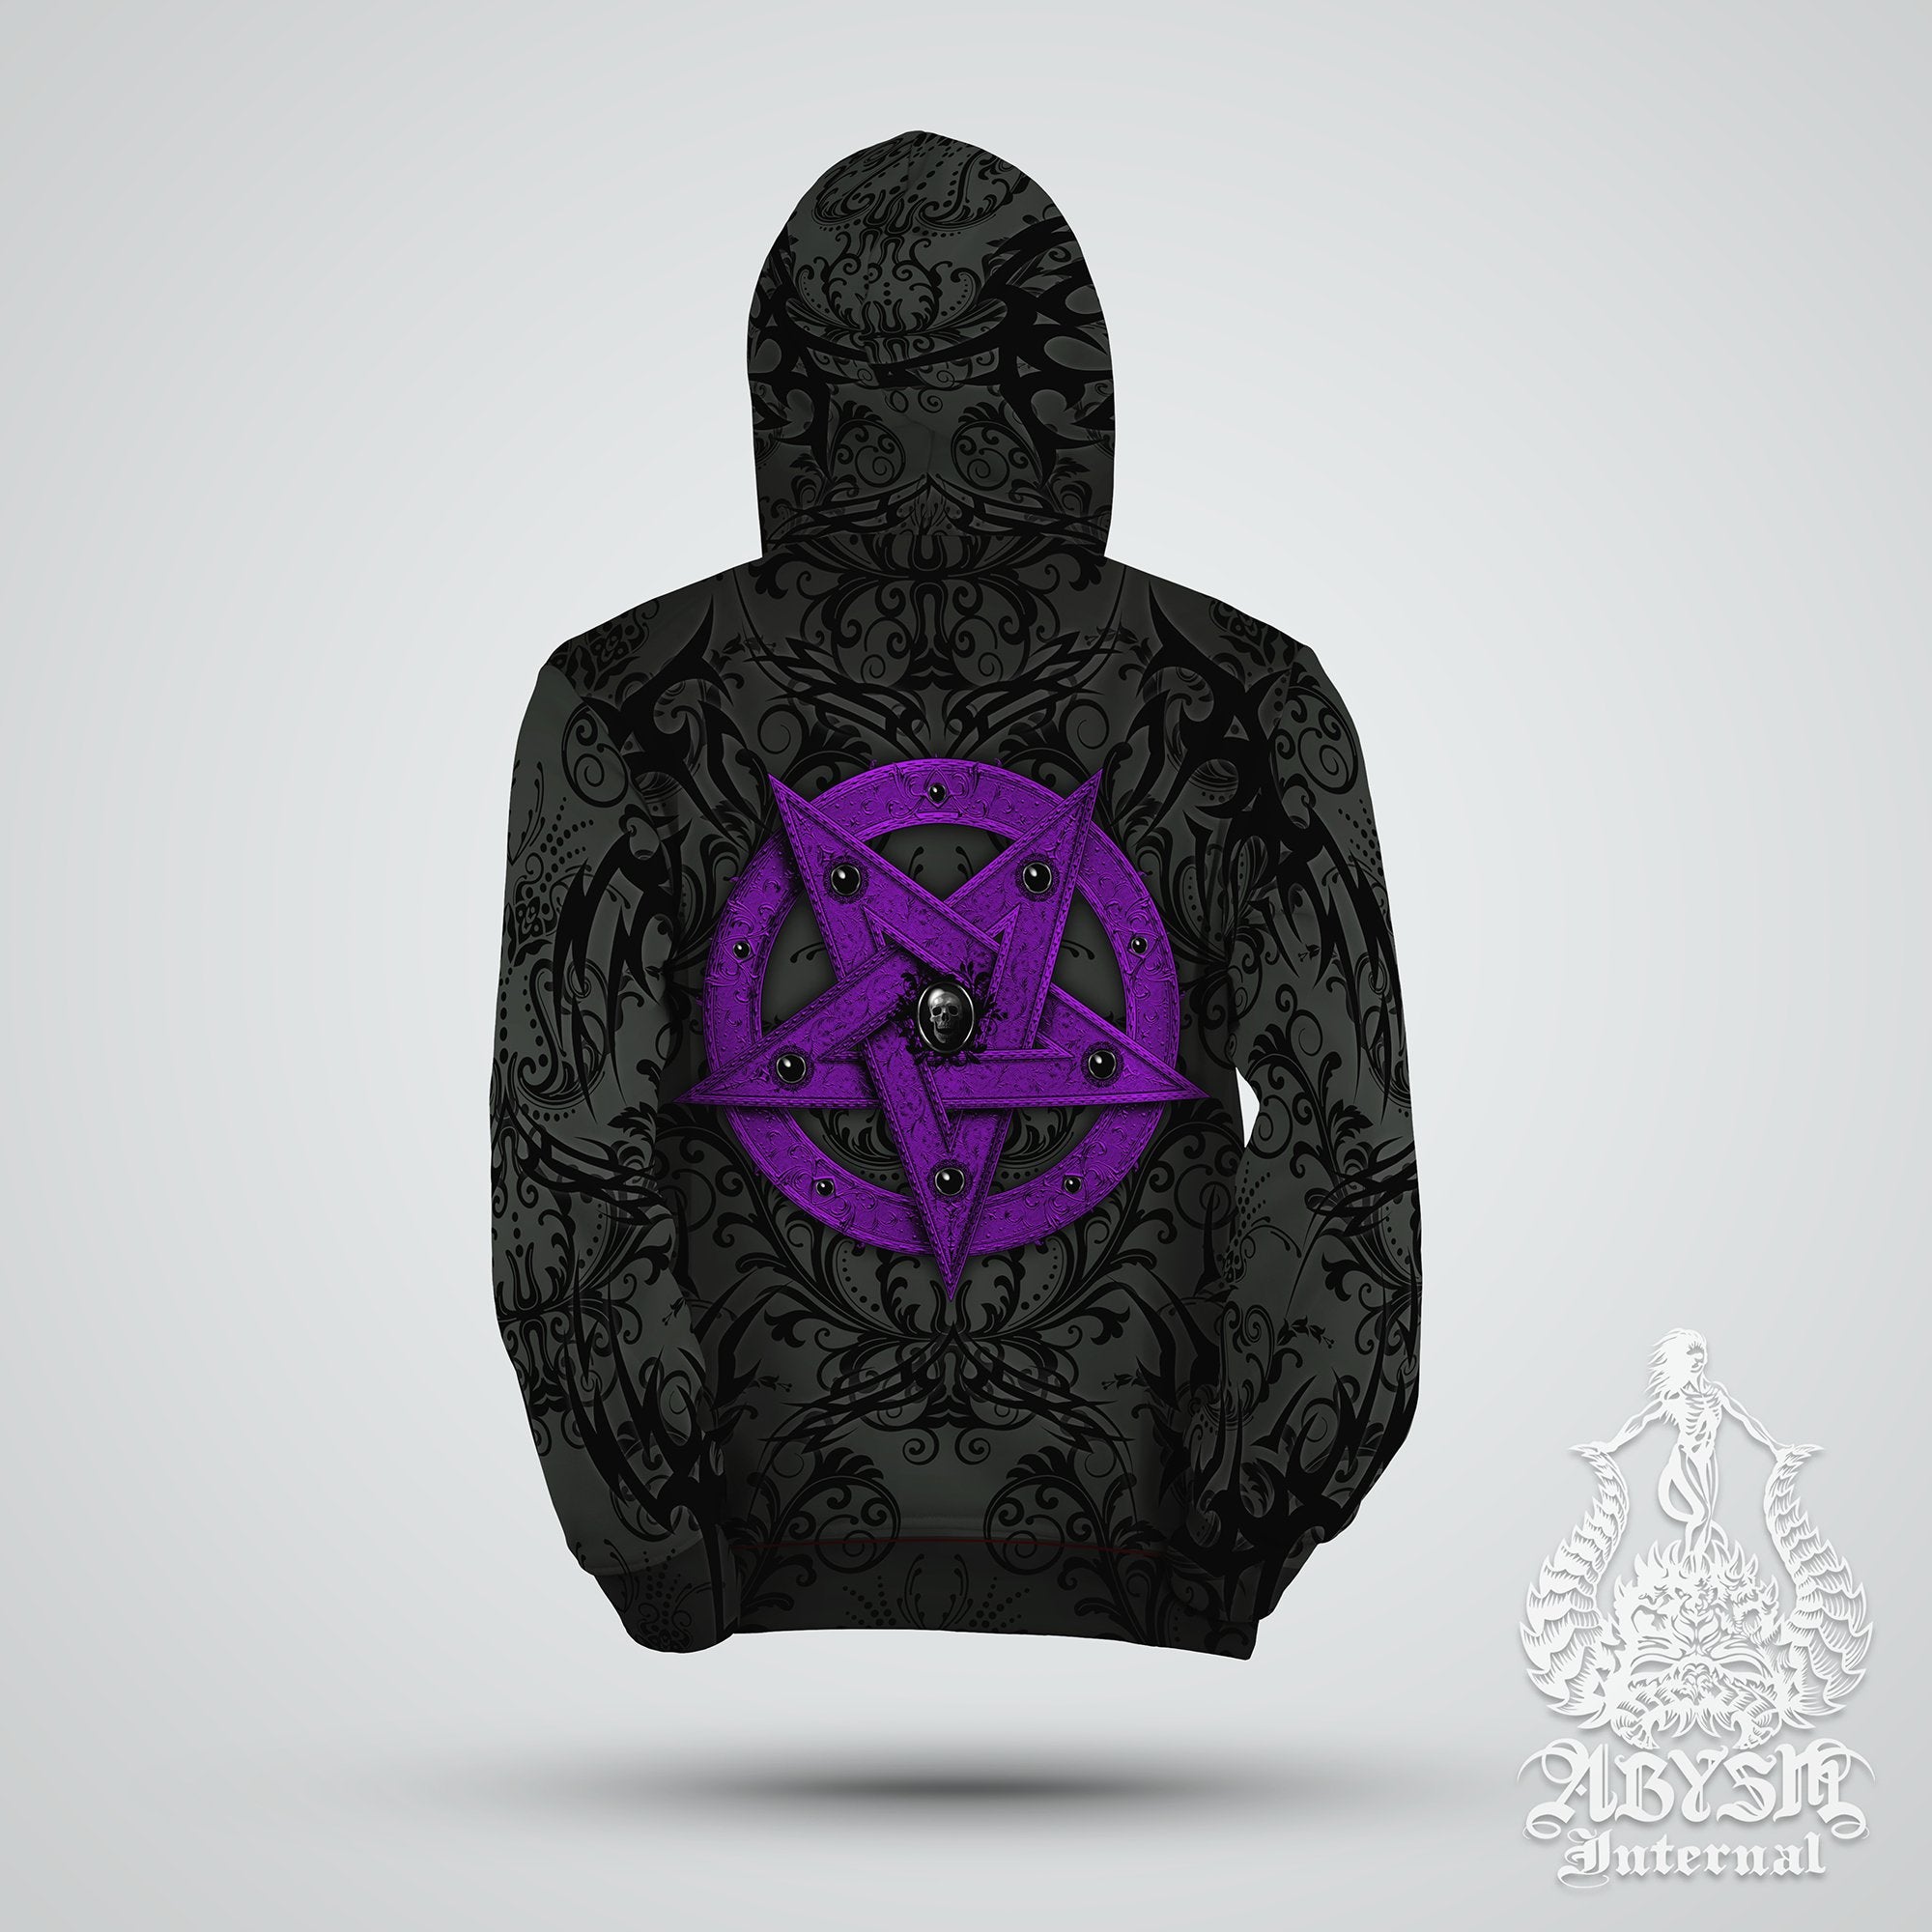 Witch Hoodie, Pastel Goth Streetwear, Purple and Black Pentagram, Witchy Sweater, Gothic Outfit, Alternative Clothing, Unisex - Abysm Internal